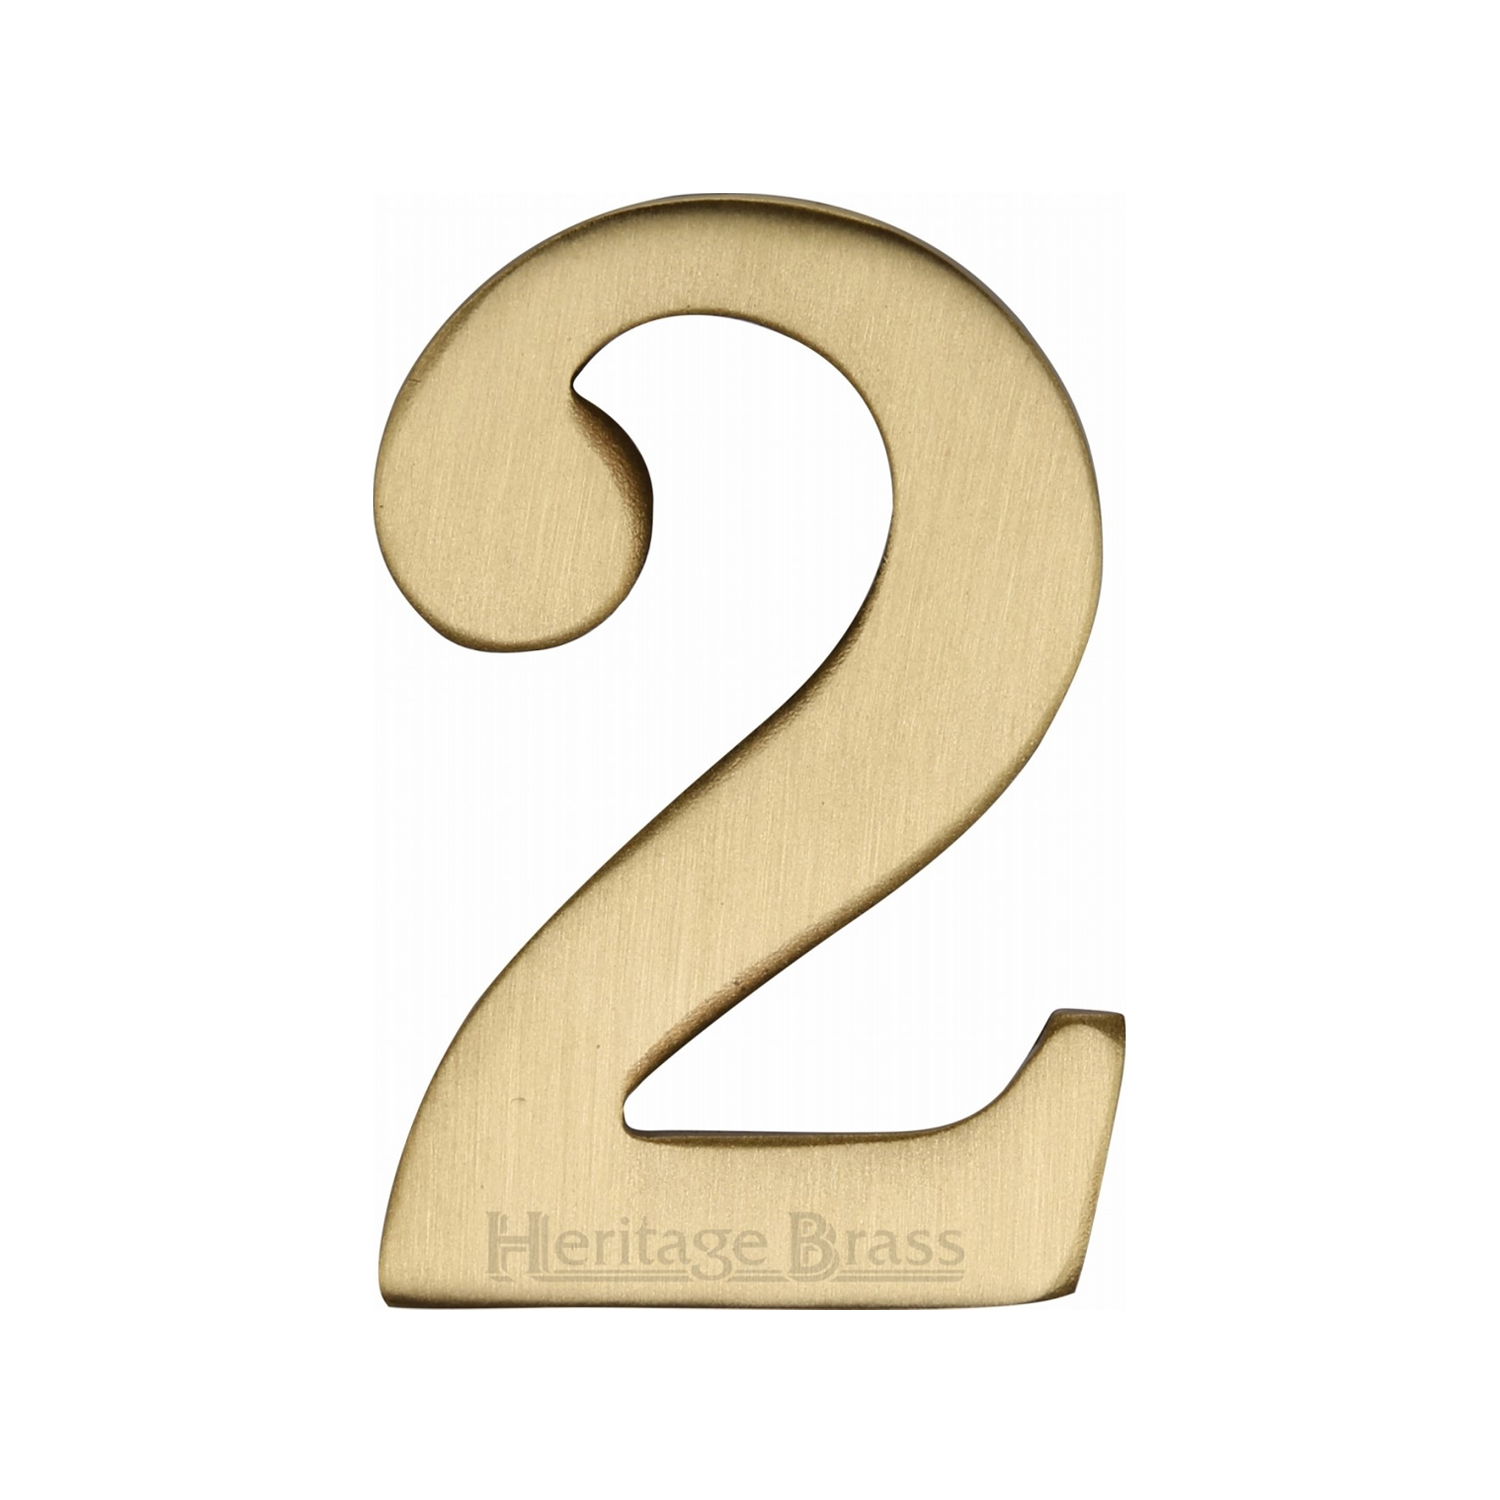 Heritage Brass Numeral 2 Self Adhesive 51mm (2")